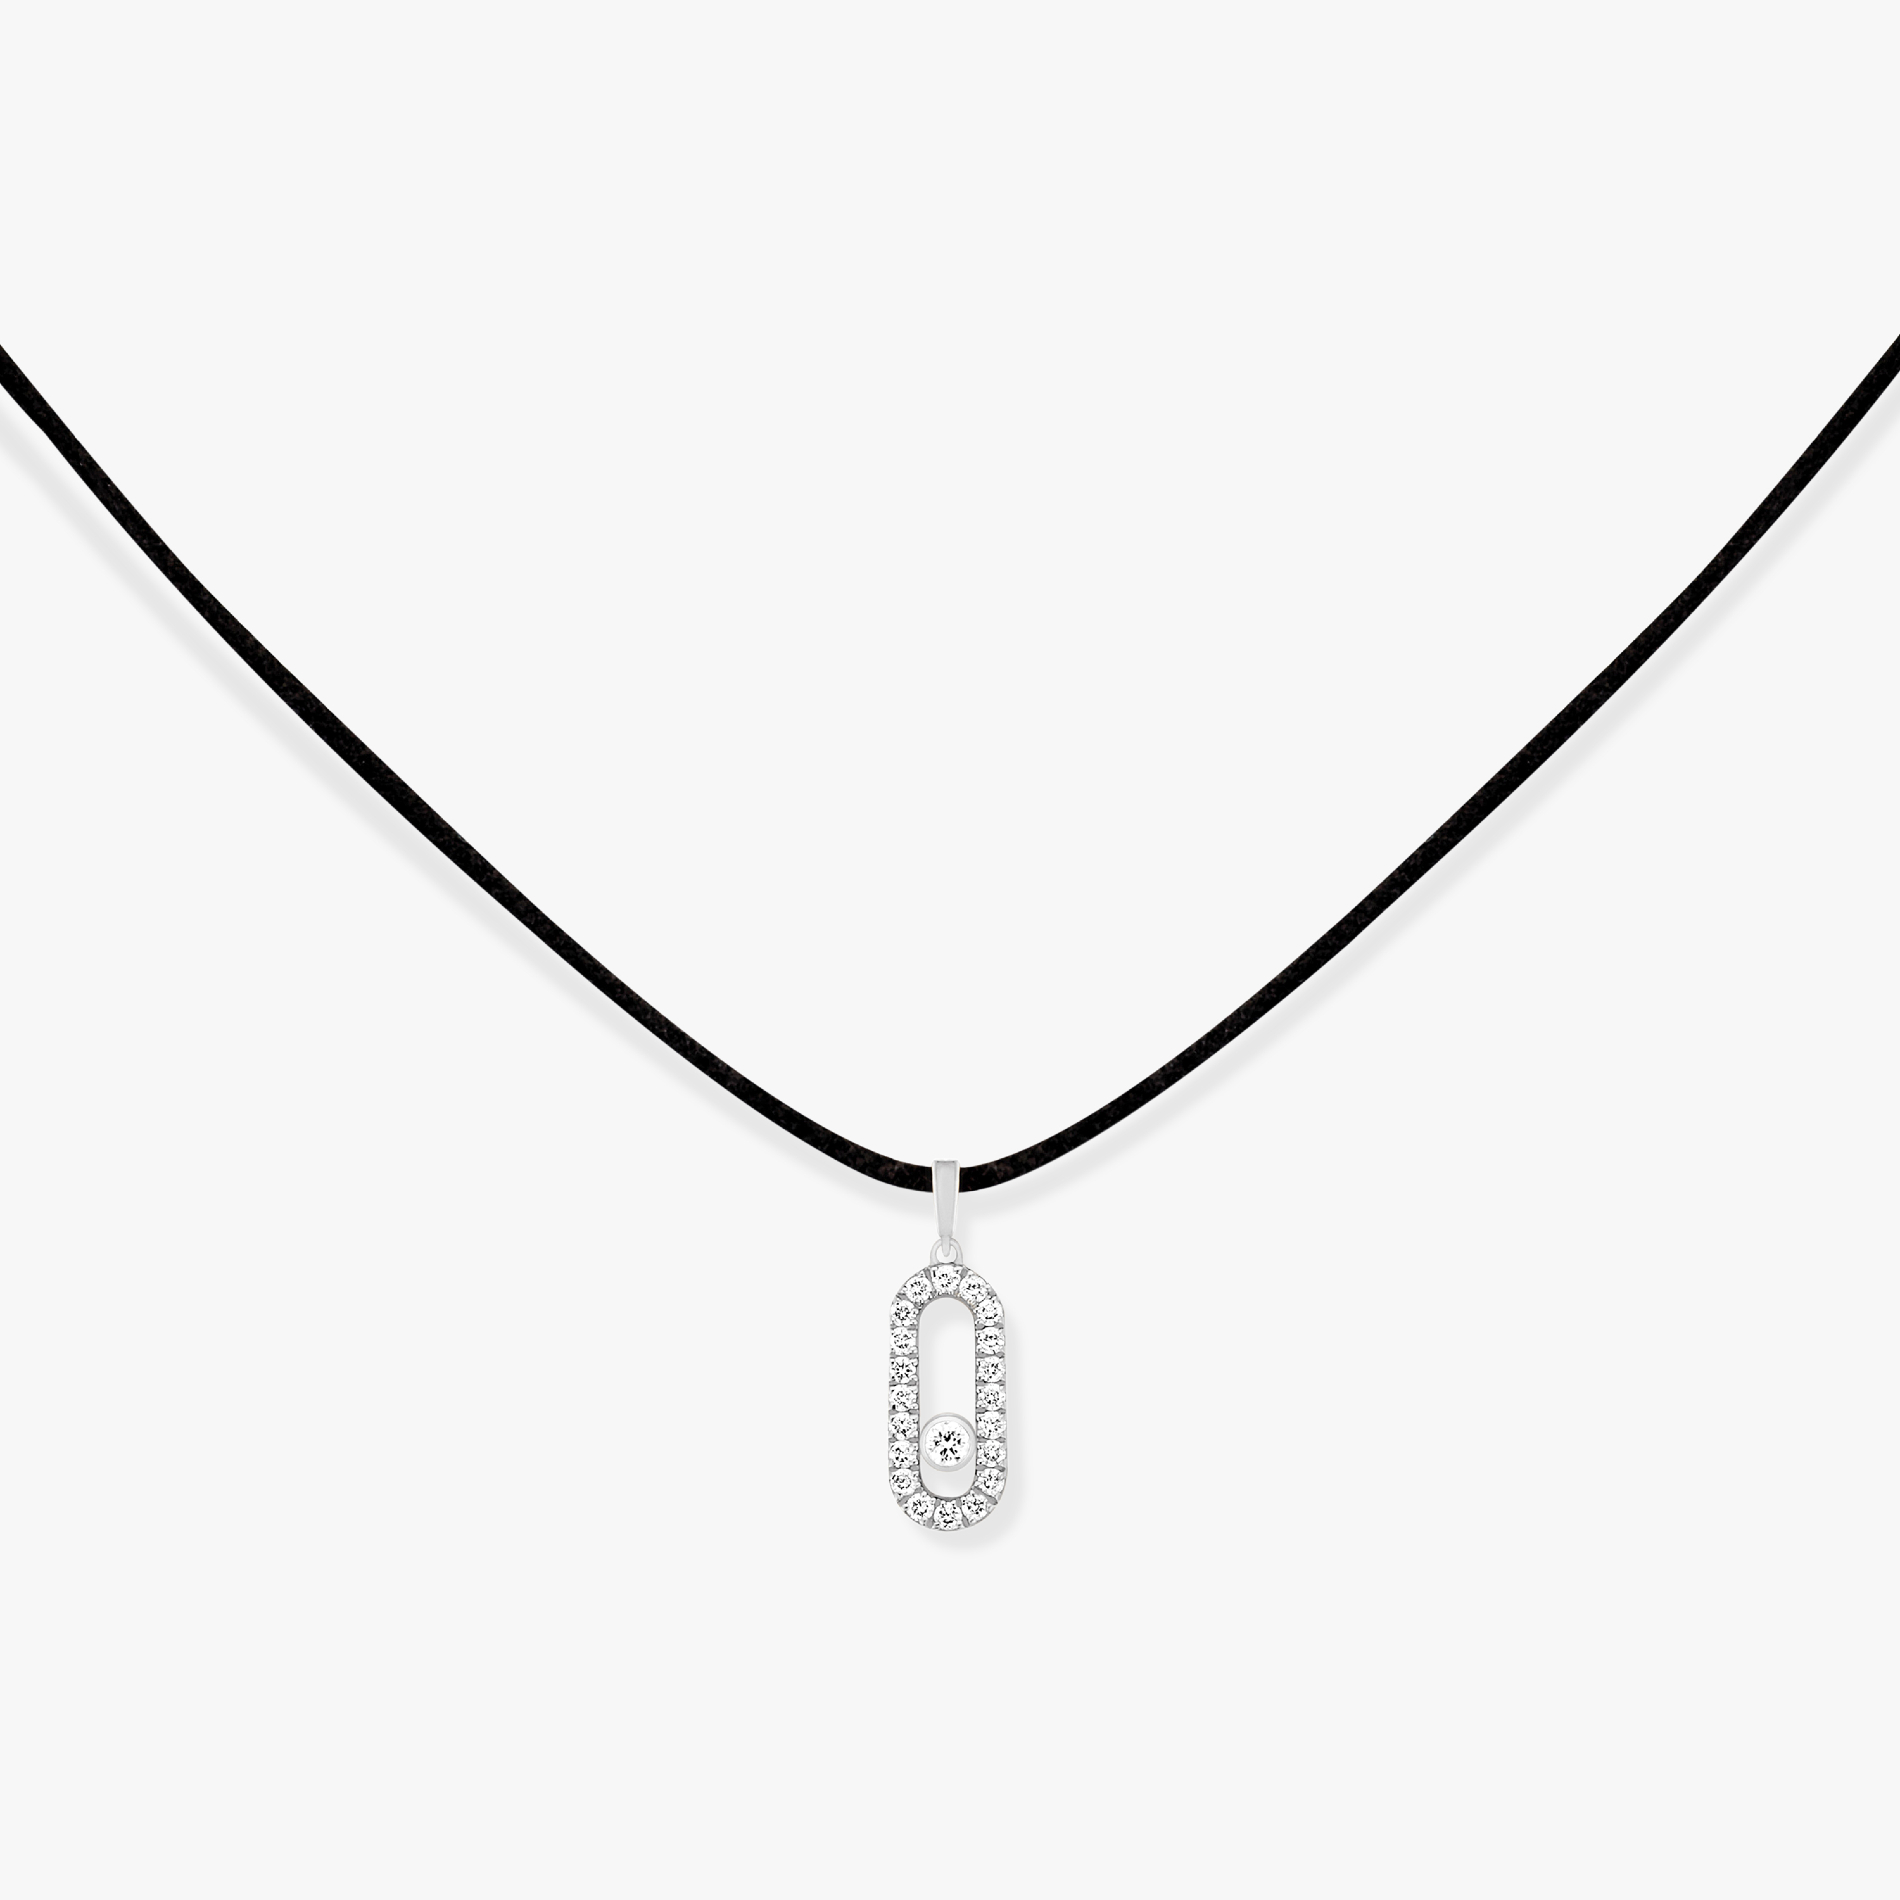 Collier Femme Or Blanc Diamant Collier Messika CARE(S) Pavé 12073-WG